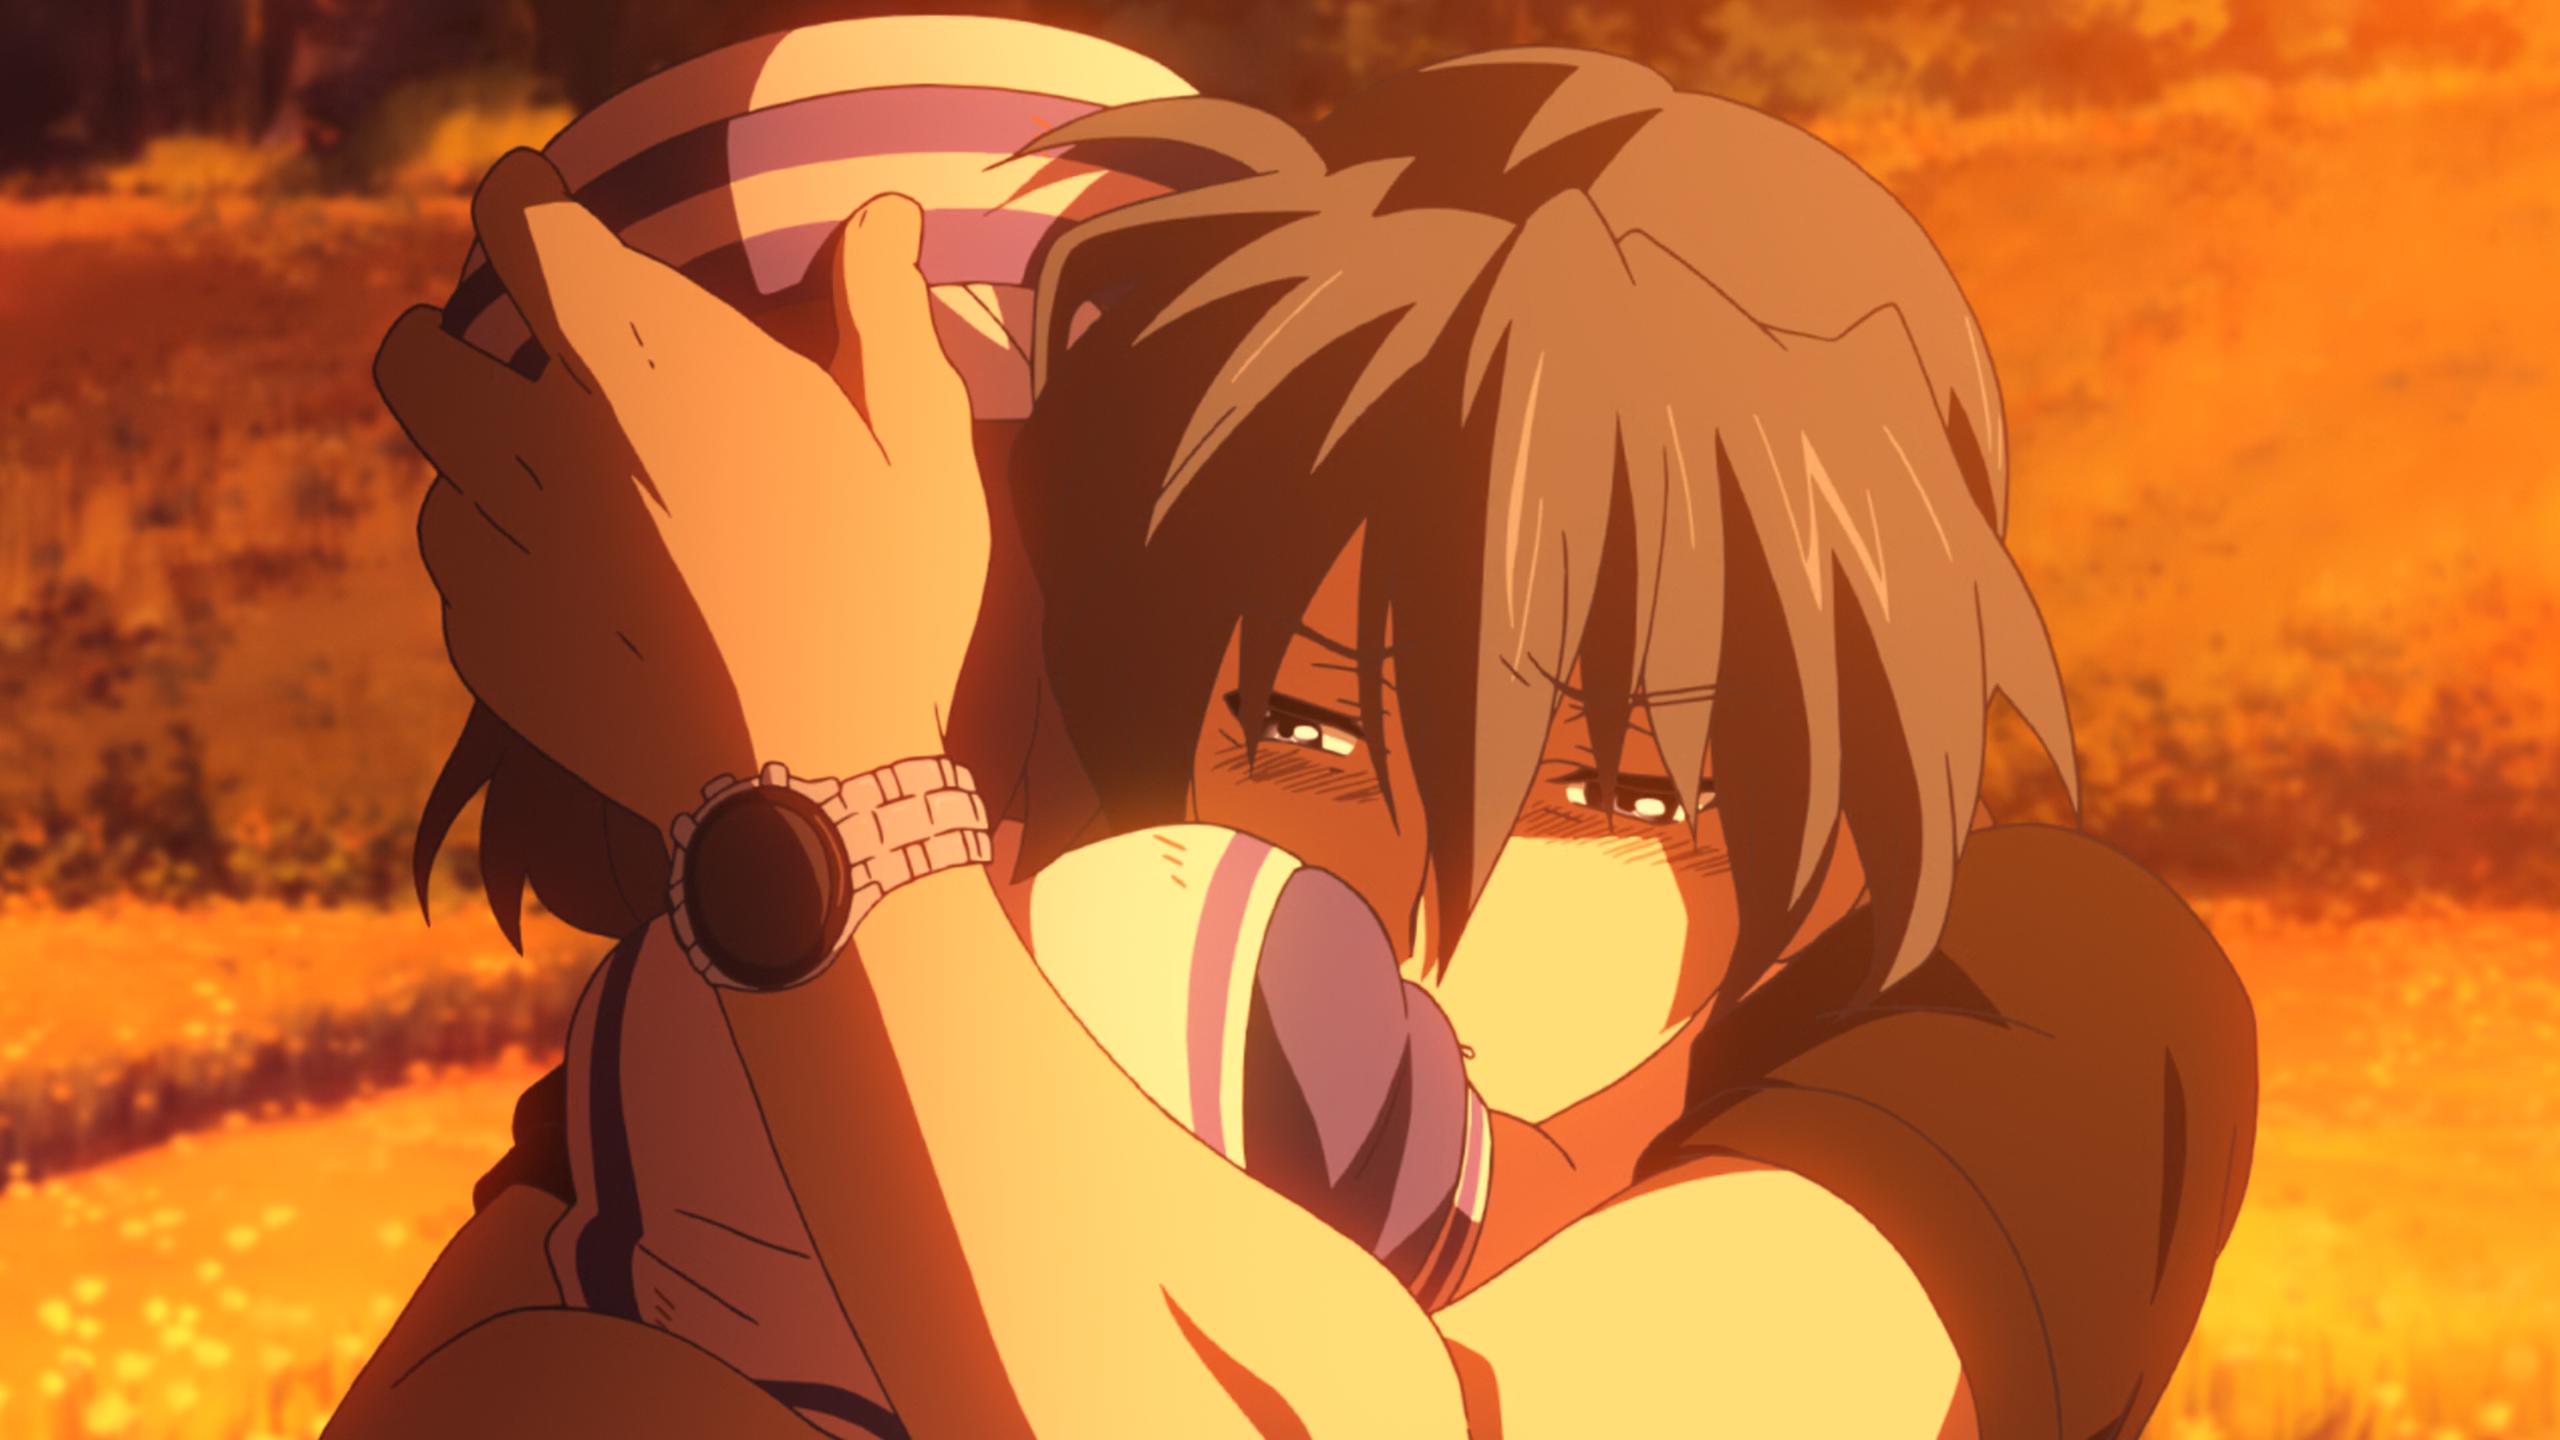 Clannad: After Story 